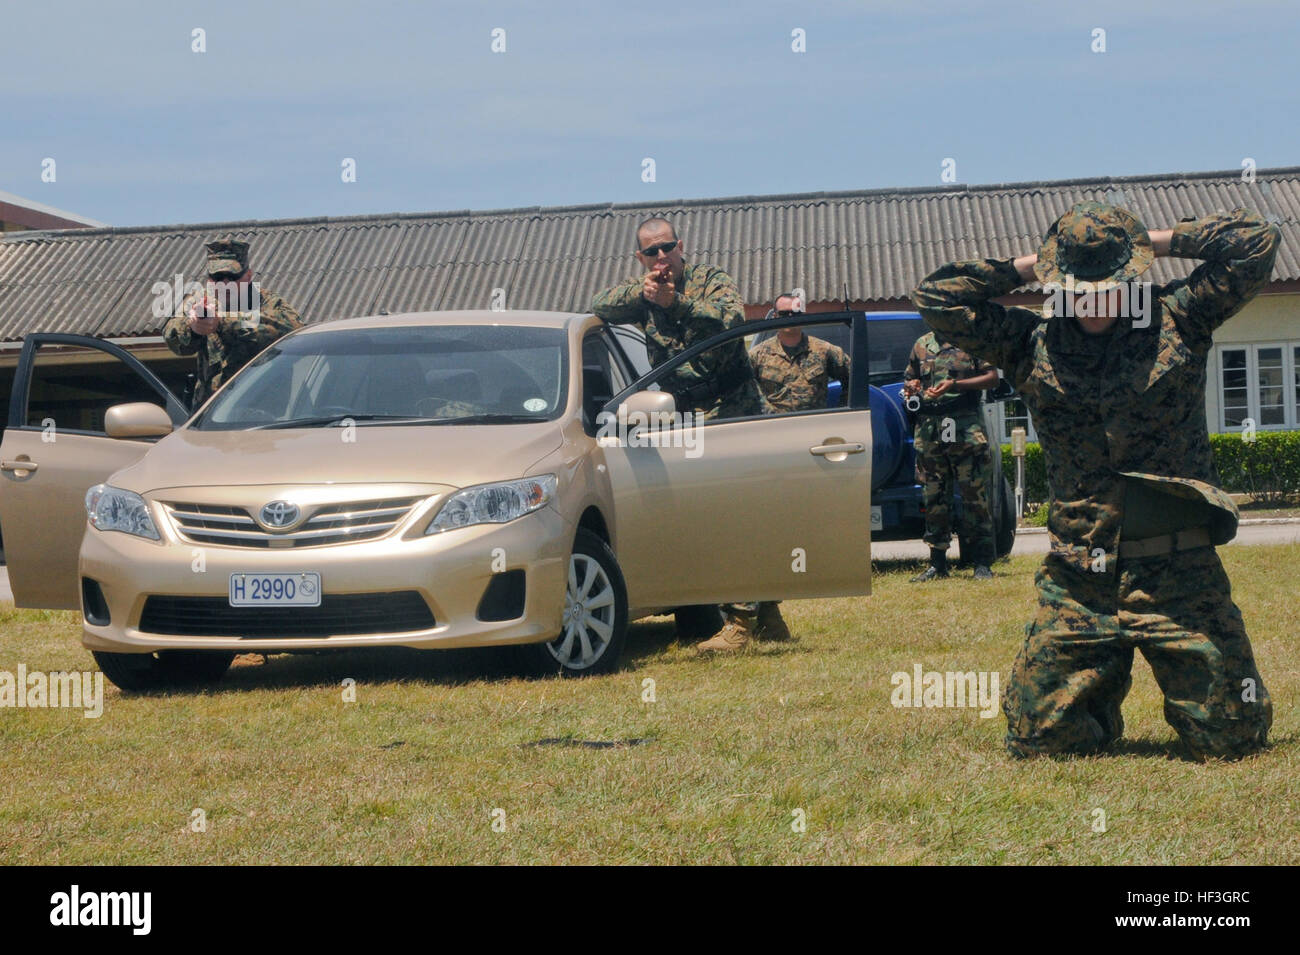 U.S. Marine Corps Lt. Col. Michael Kindorf (left) and Chief Warrant Officer 2 Victor Ojeda (center), both members of the 23rd Marine Regiment, instruct a role-player to raise his hands while demonstrating proper vehicle and individual searching techniques during a class at the Regional Barbados Police Training Center, Christ Church, Barbados, June 22, 2012. Tradewinds is a multinational, interagency exercise designed to develop and sustain relationships that improve the capacity of U.S., Canadian and 15 Caribbean partner nations' security forces to counter transnational crime and provide human Stock Photo